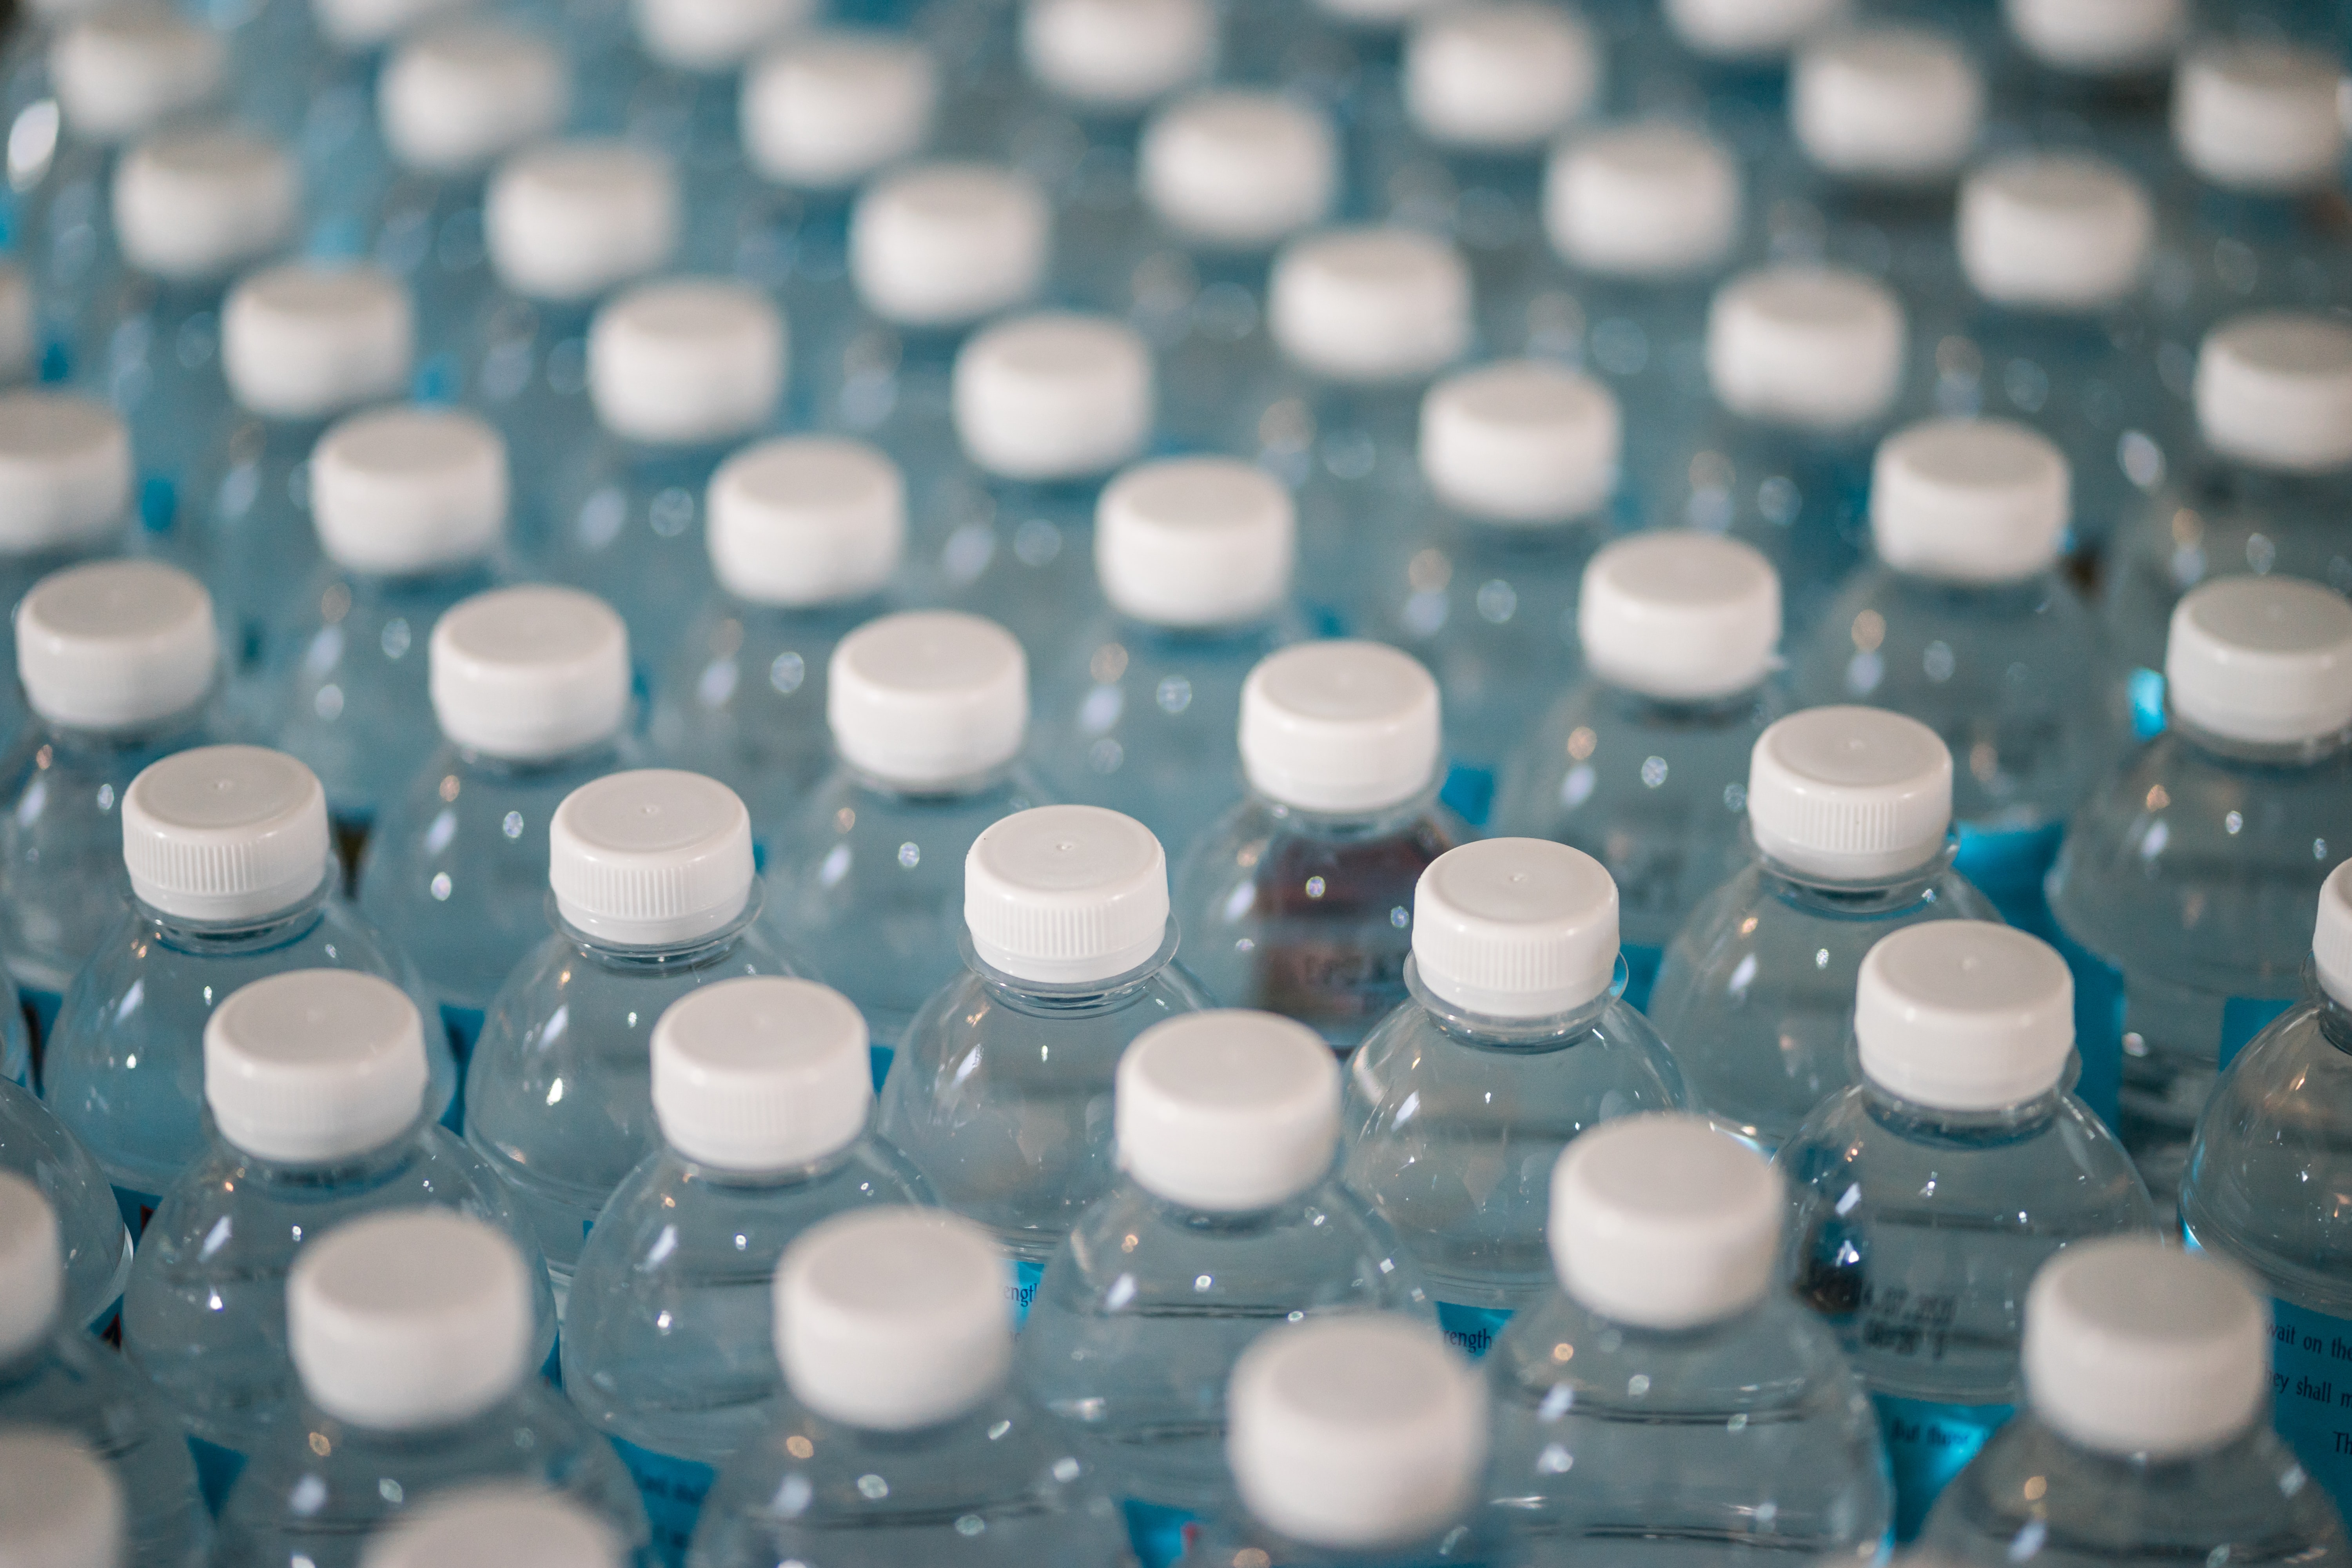 An image of several bottles coming off the production line — Helium and Helium hotspots can help track items as they move through the supply chain